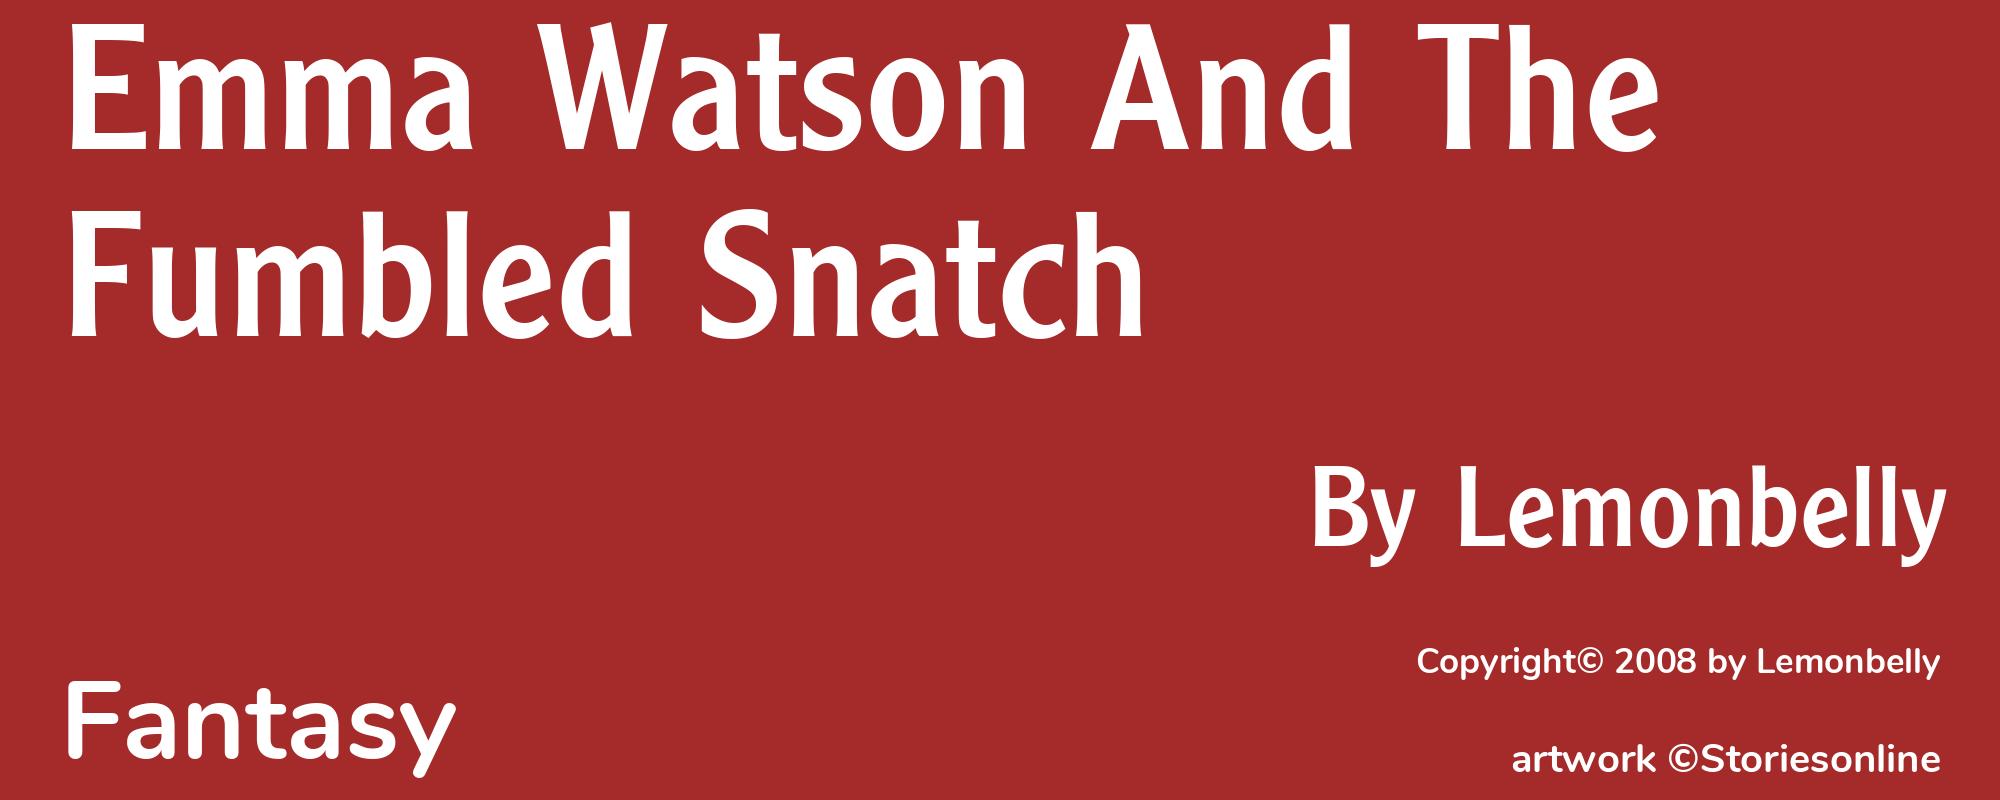 Emma Watson And The Fumbled Snatch - Cover